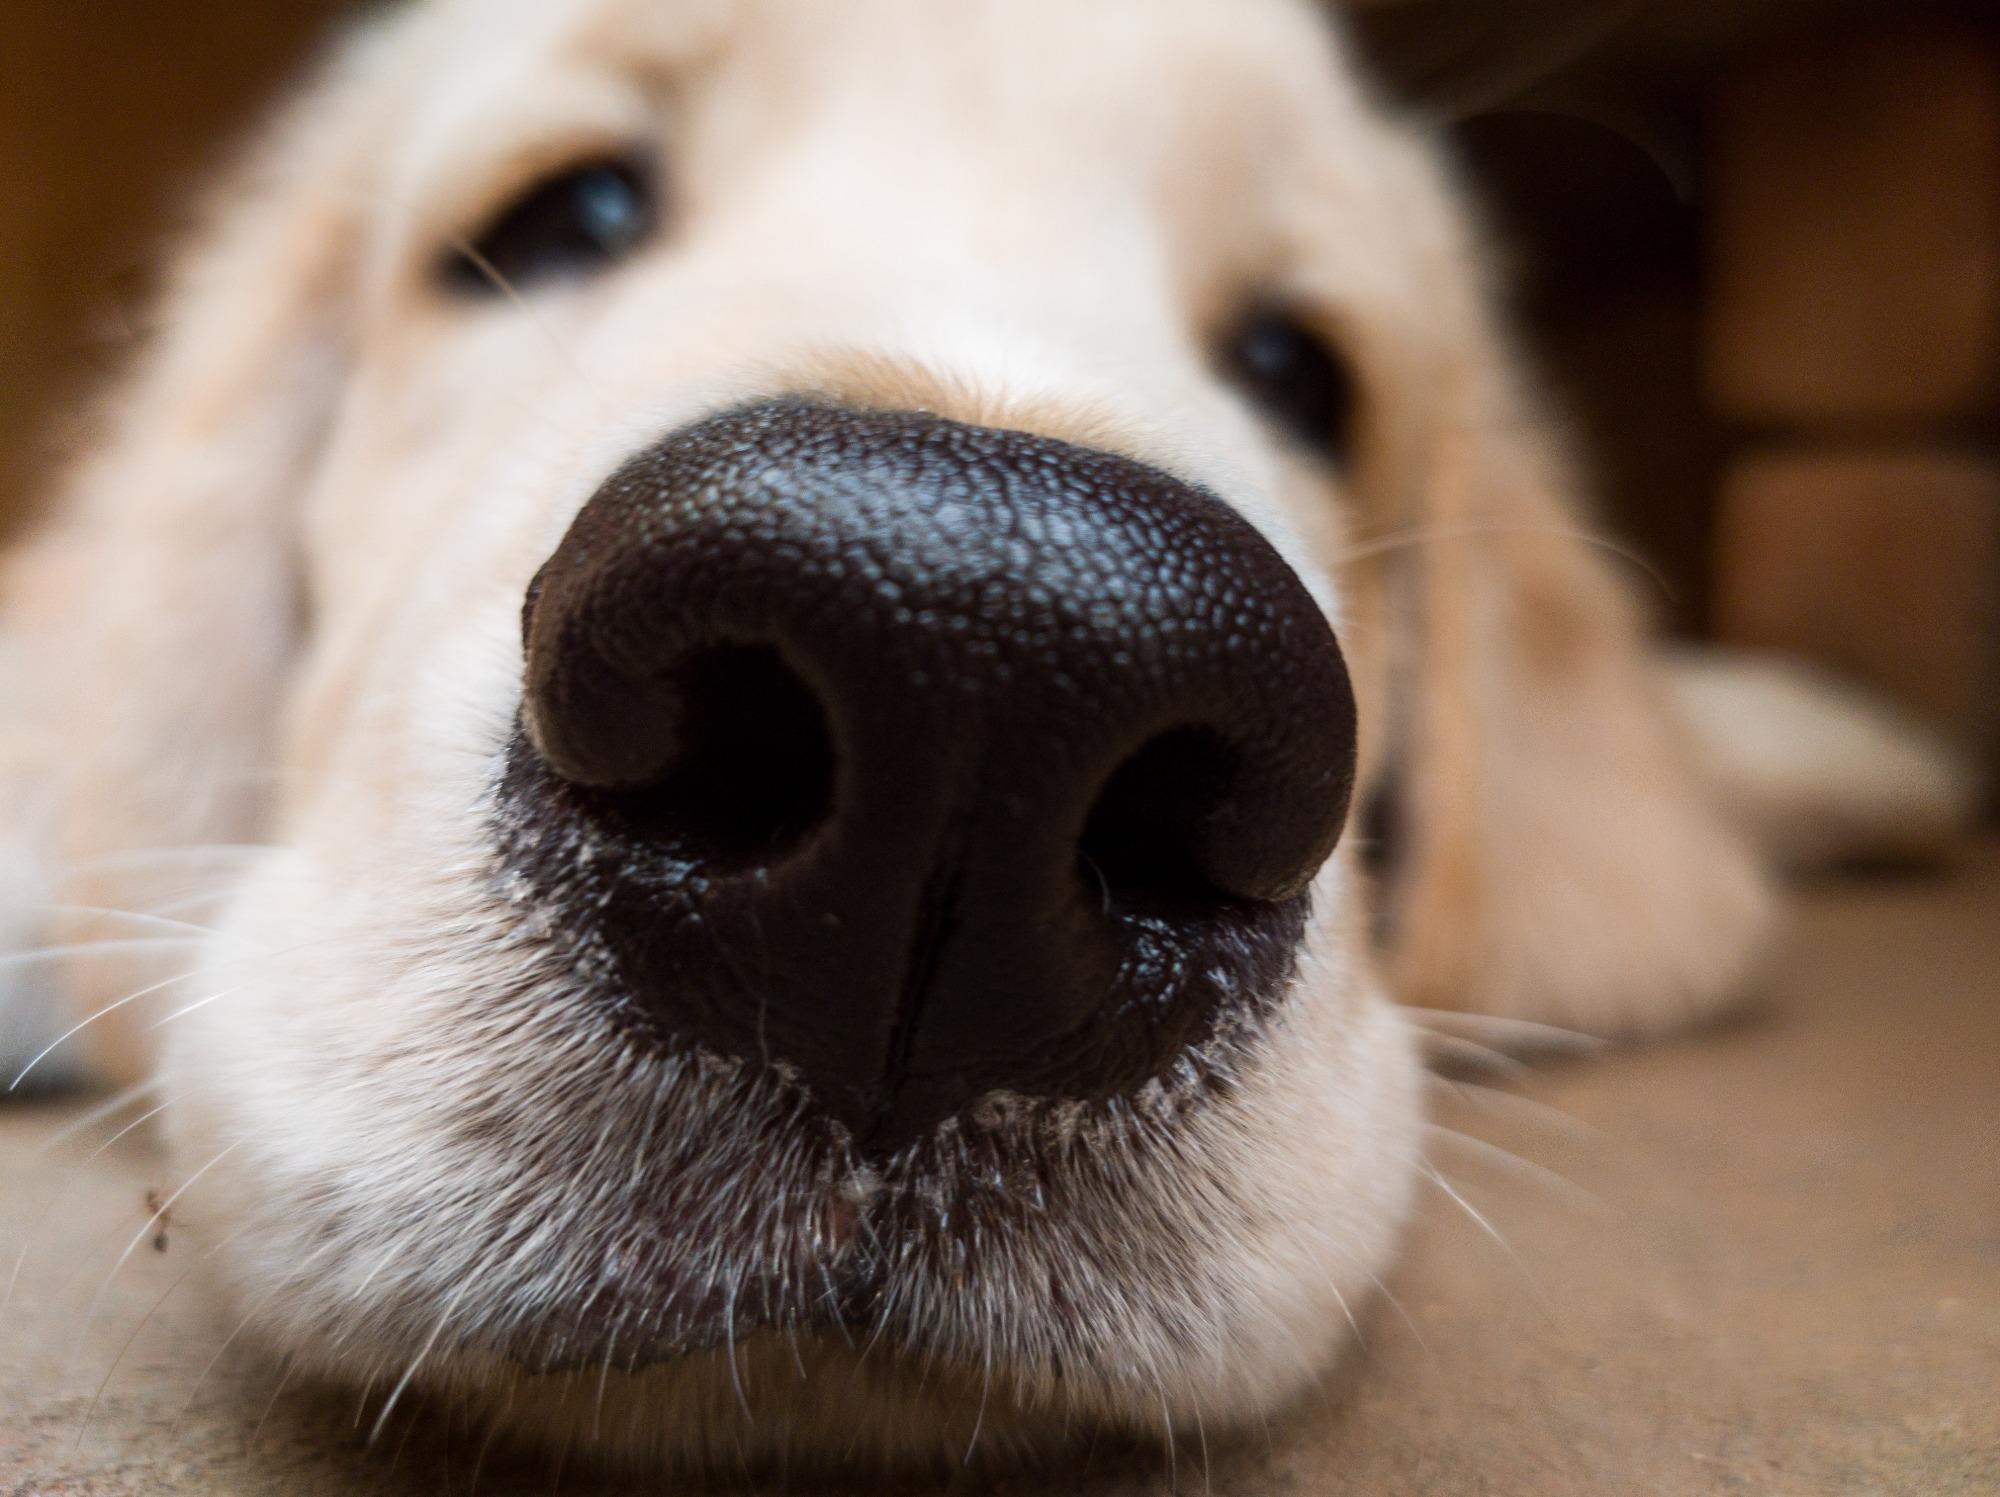 Study: Detection of SARS-CoV-2 by Canine Olfaction: A Pilot Study. Image Credit: Shrikar S / Shutterstock